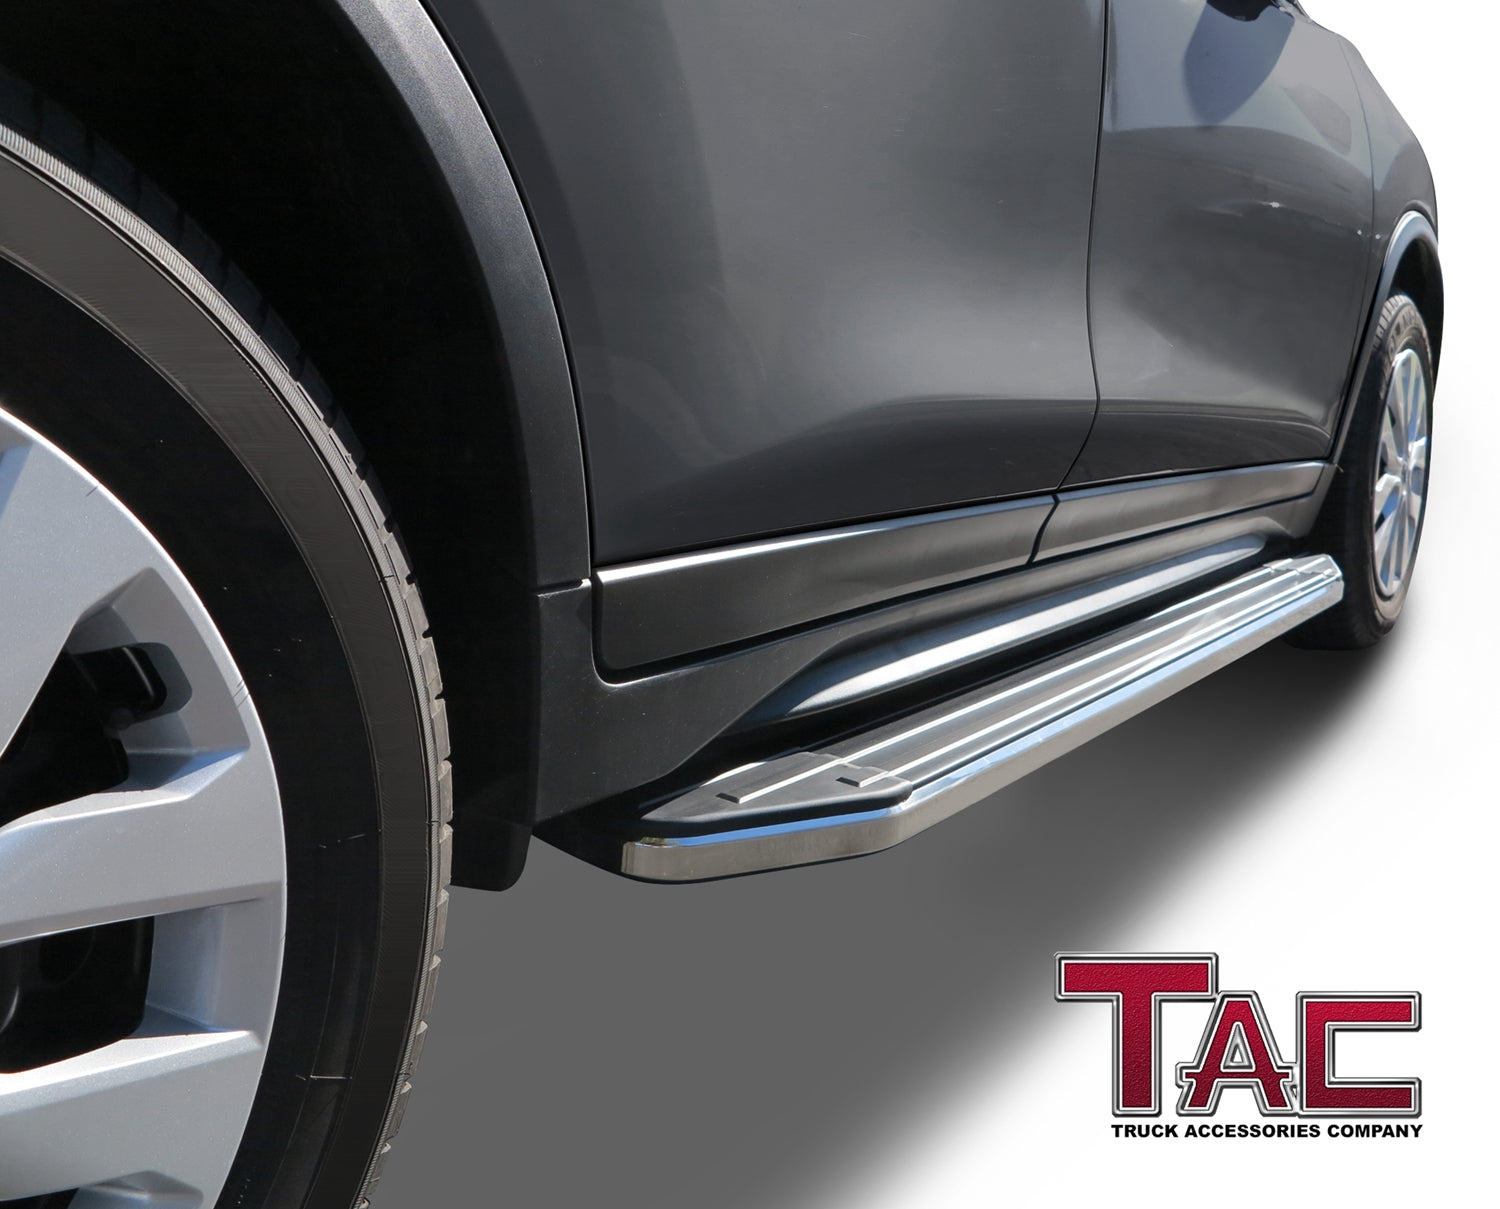 TAC ViewPoint Running Boards Fit 2011-2020 Toyota Sienna (Excl. SE Model) SUV | Side Steps | Nerf Bars | Side Bars - 0